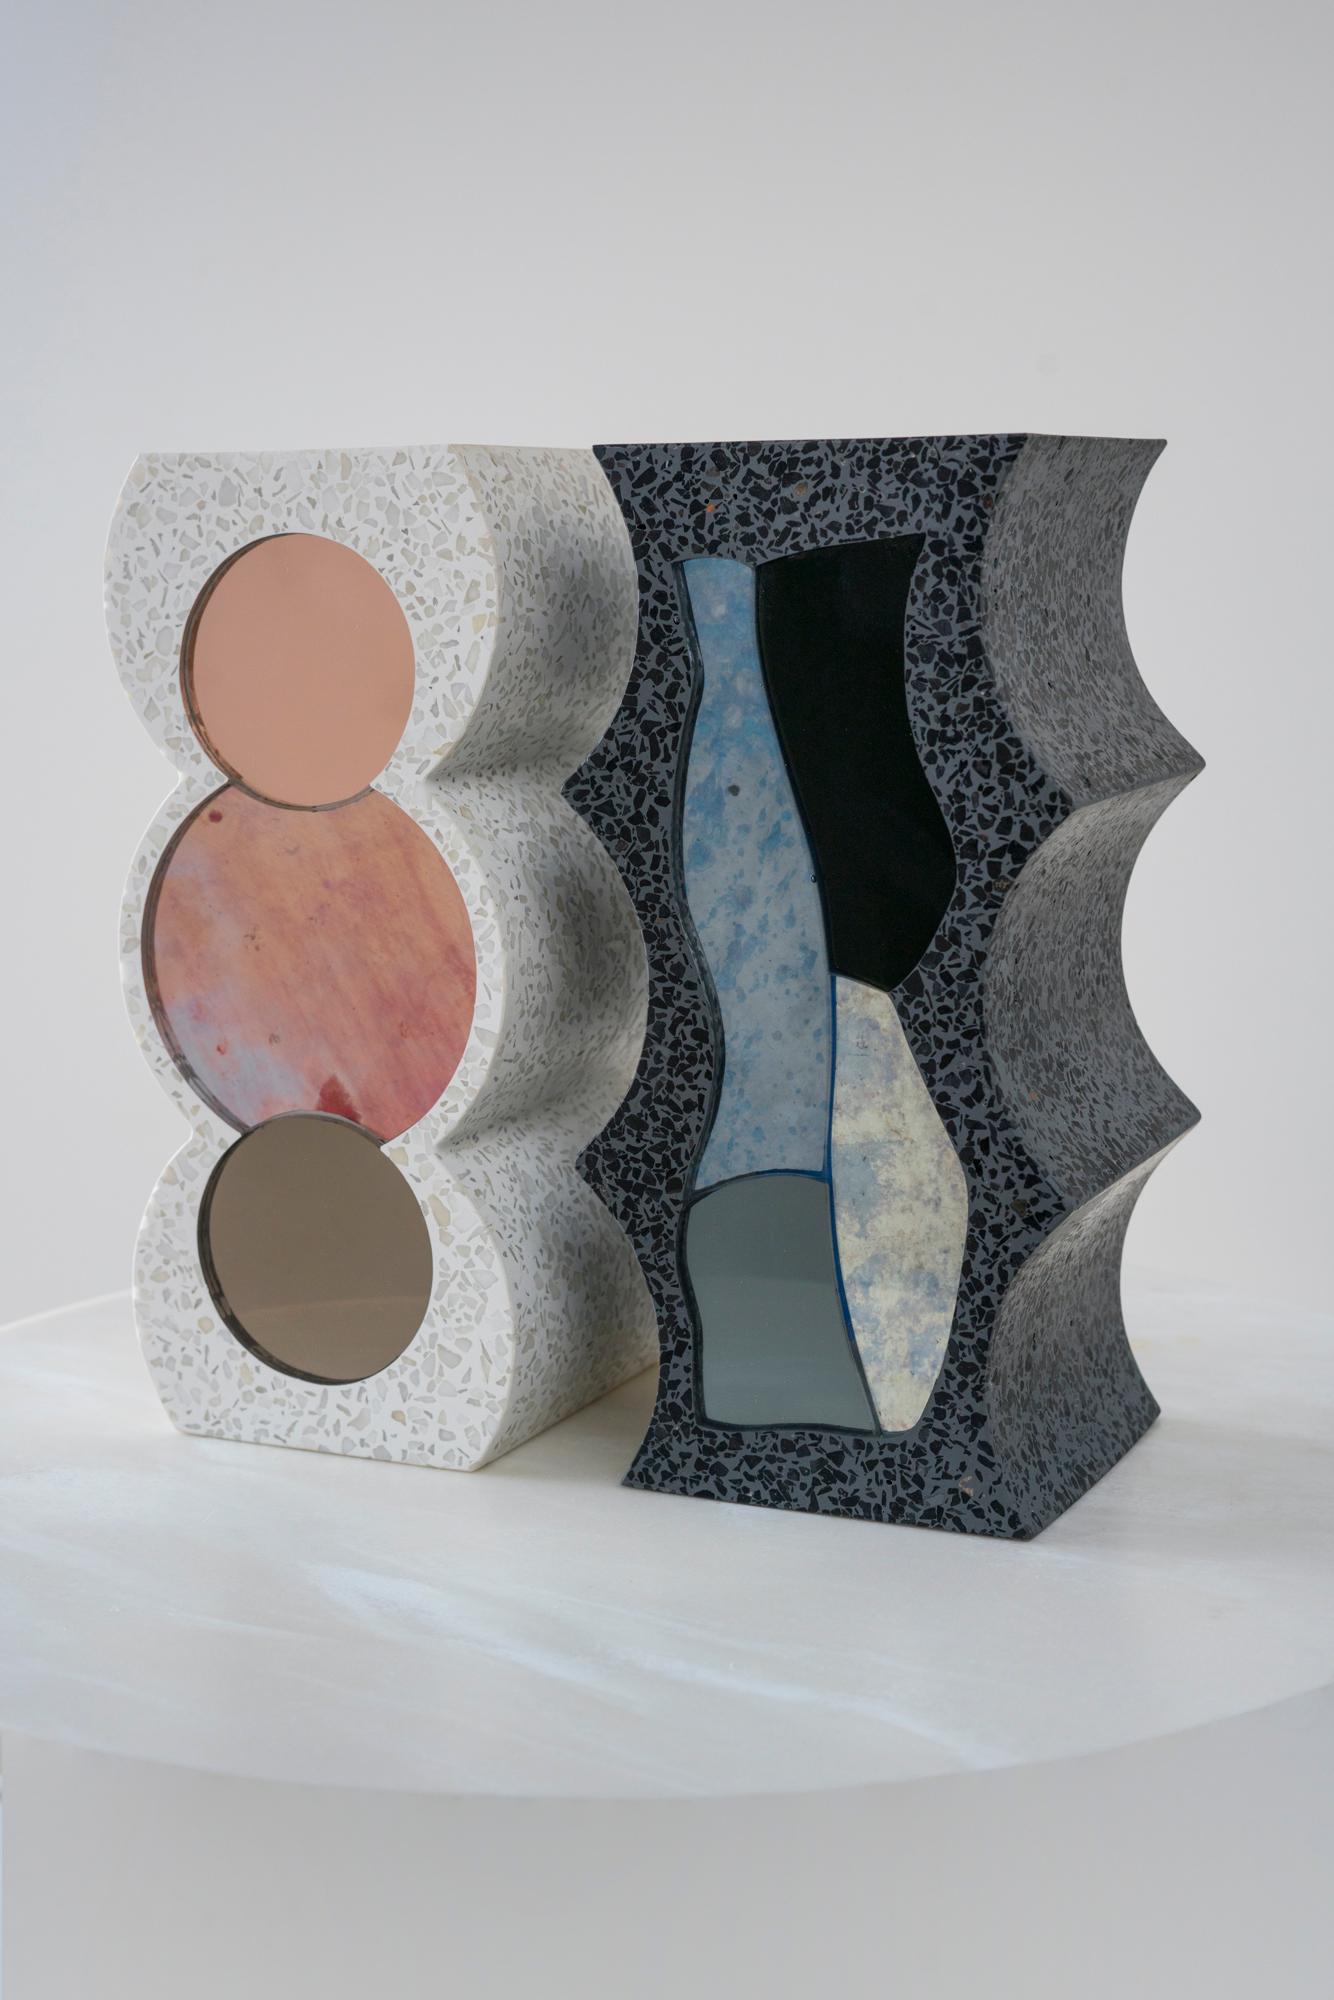 Handcut, colored mirror is cast in graphic shapes with stone terrazzo in a pair of mating bookends.